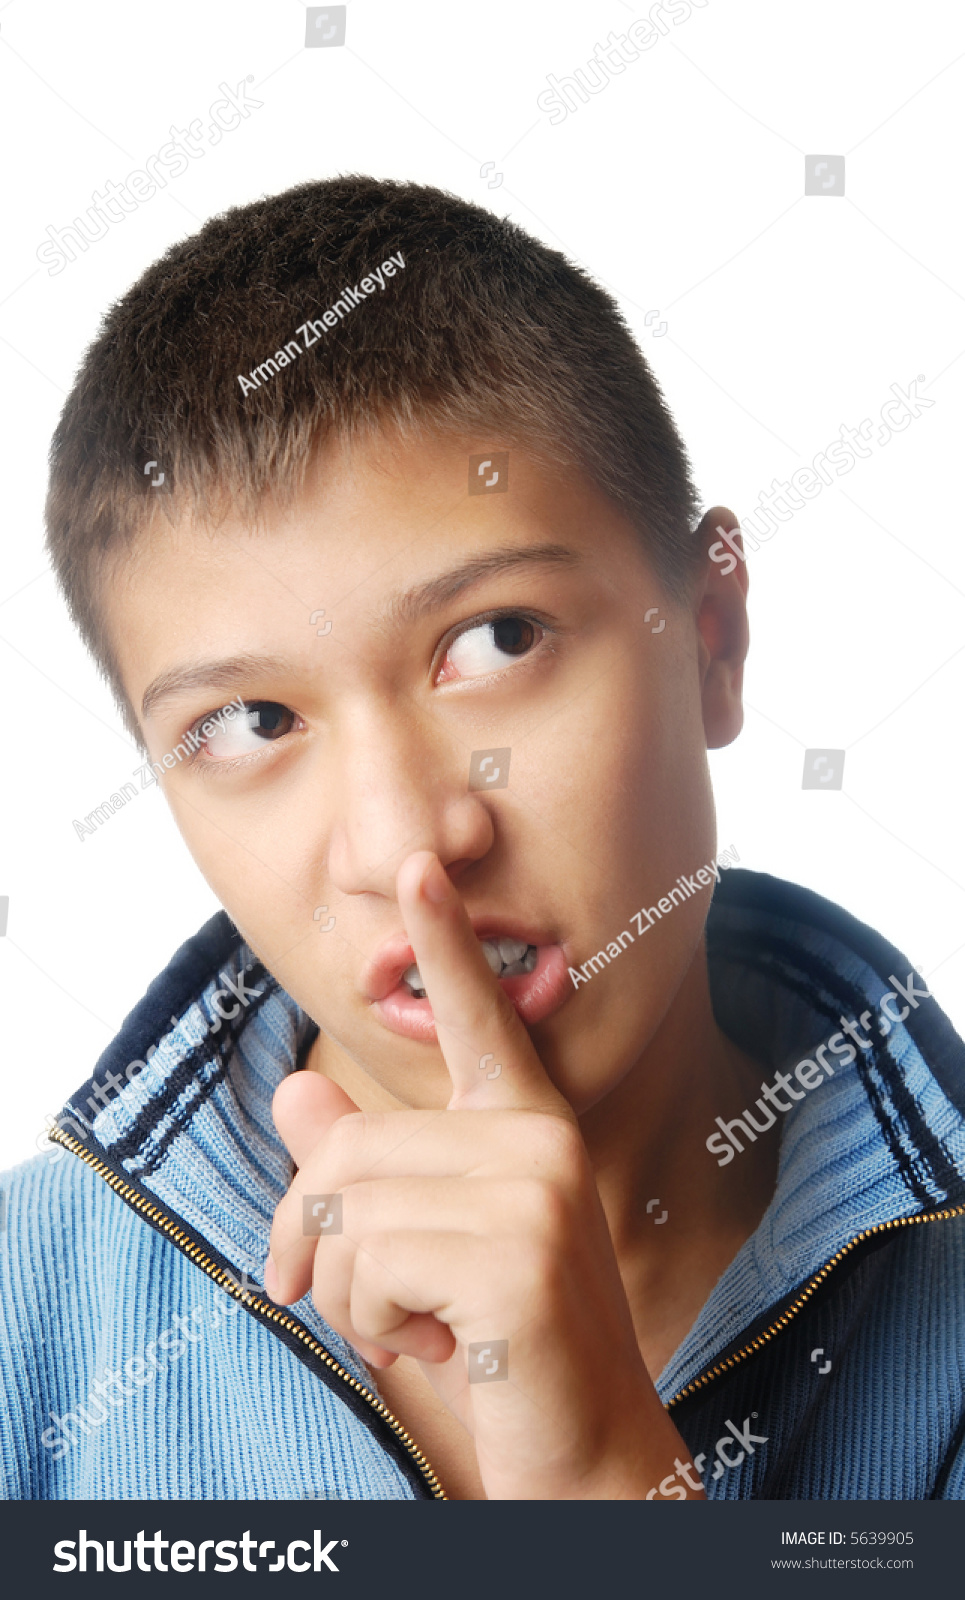 Photo of the boy with finger on his lips as a symbol of silence #5639905